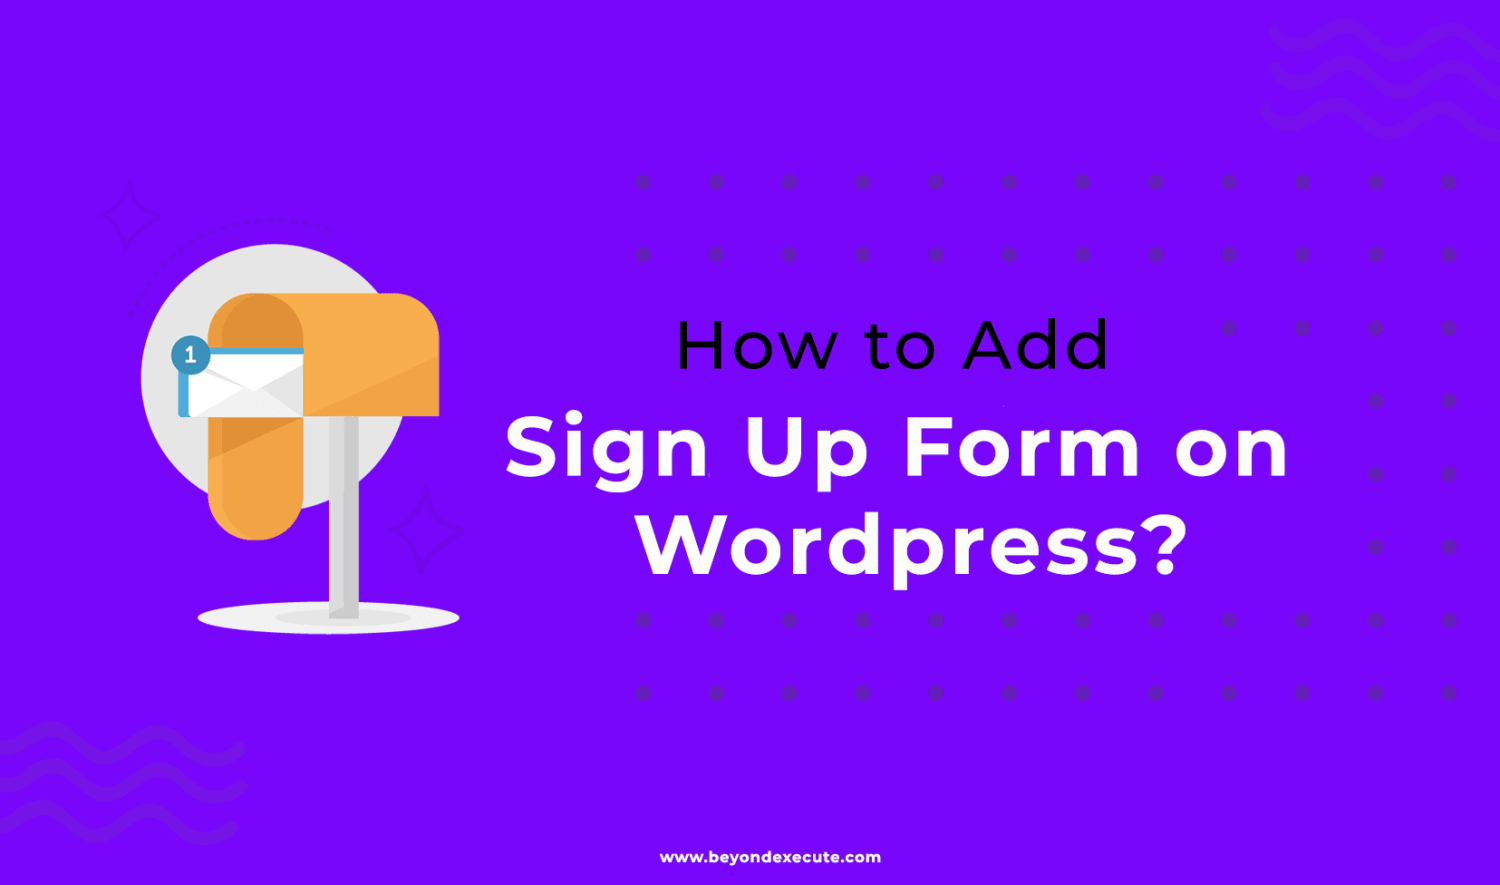 How to Add Sign Up Form on WordPress?